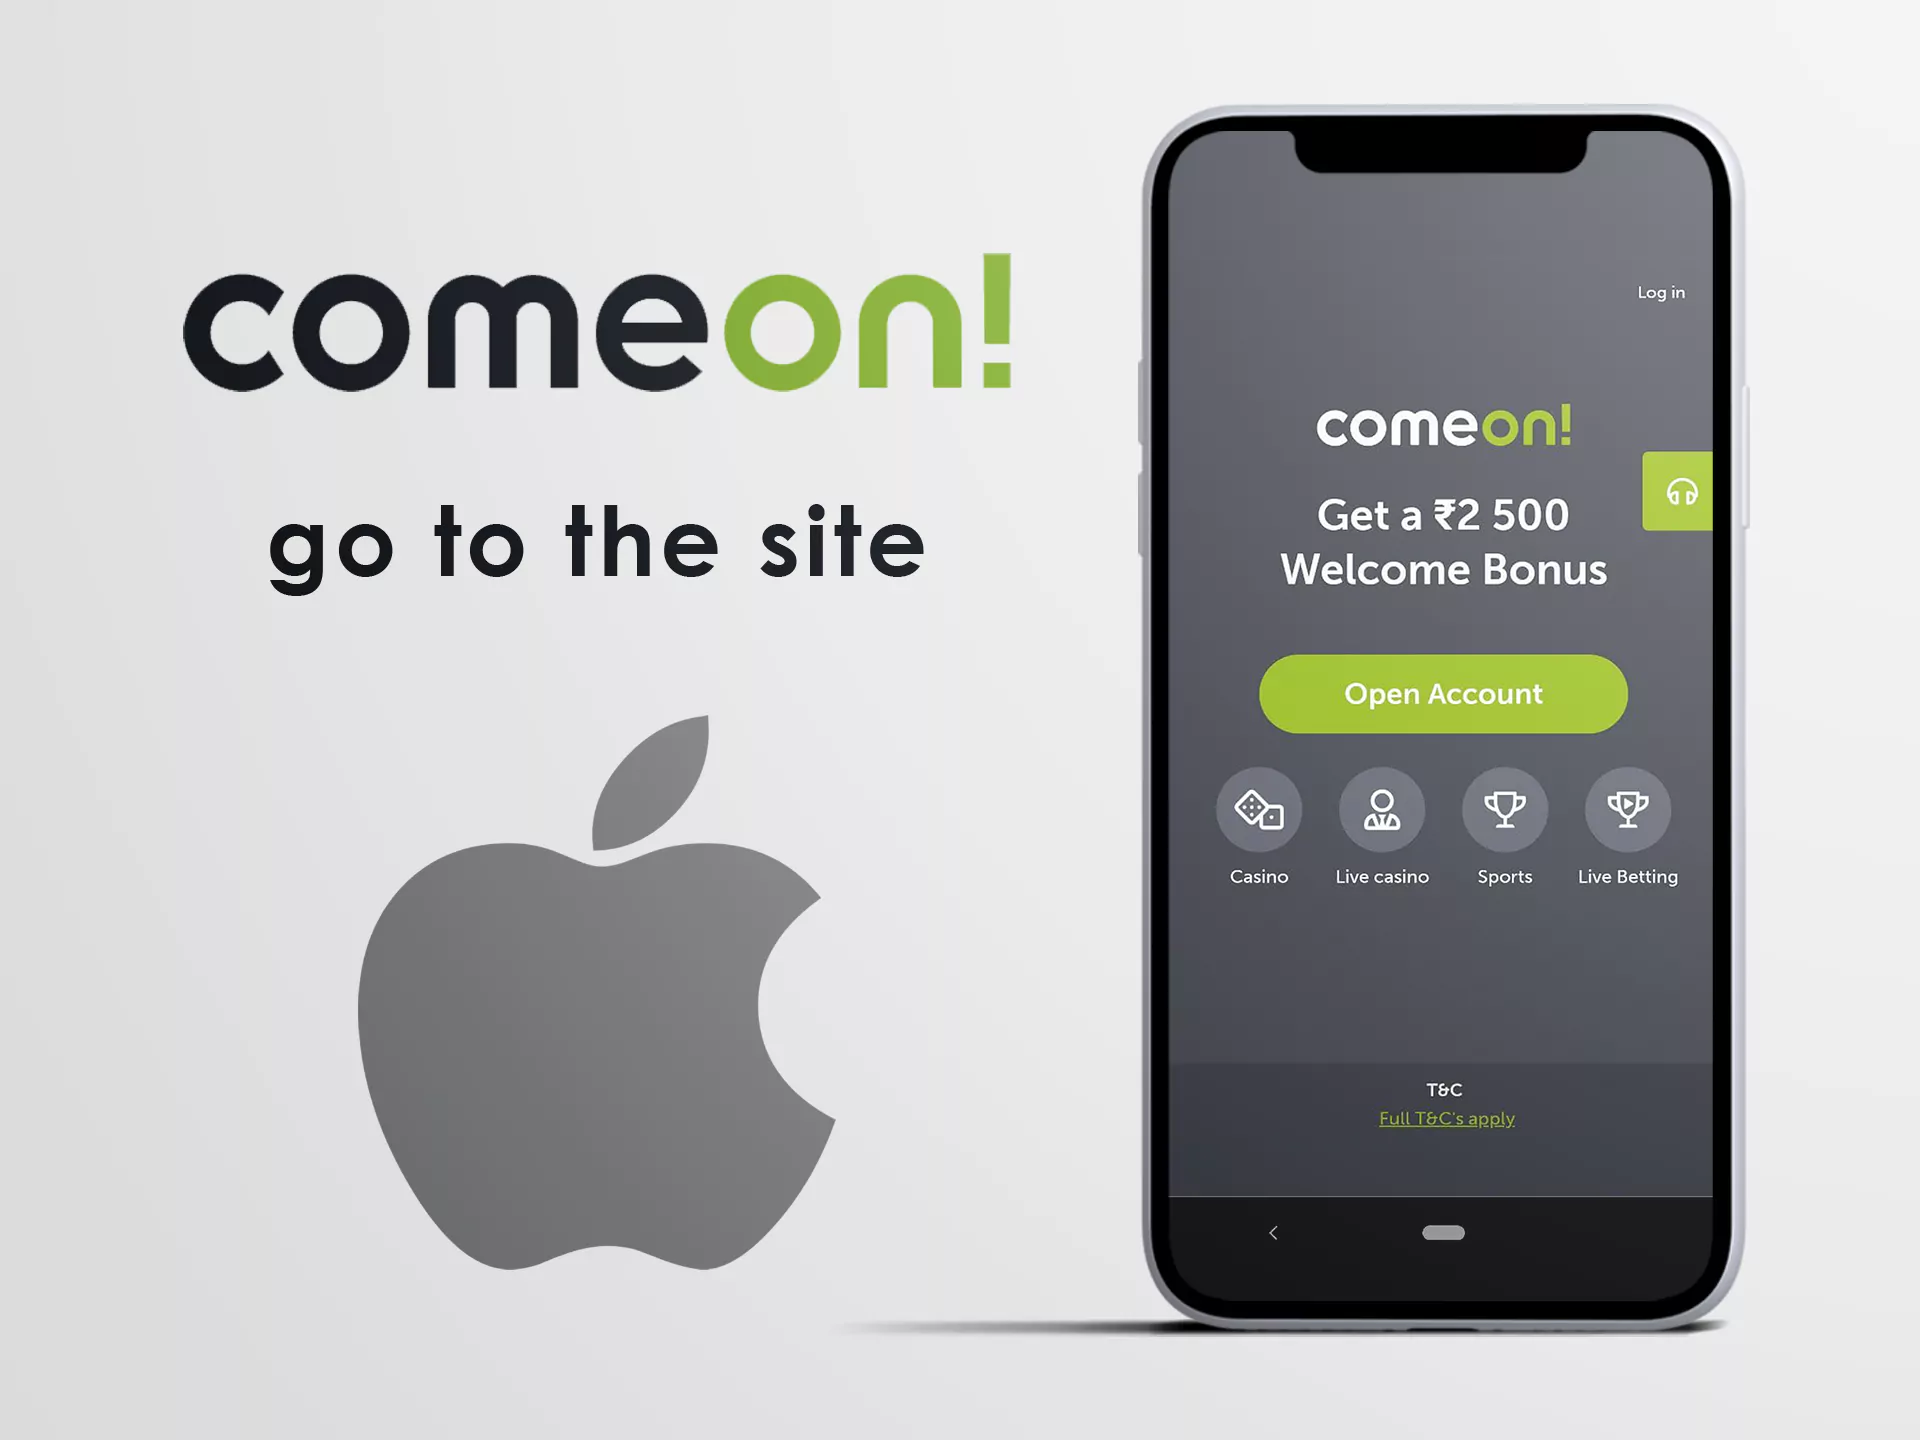 Visit the official site of Comeon in a mobile browser.